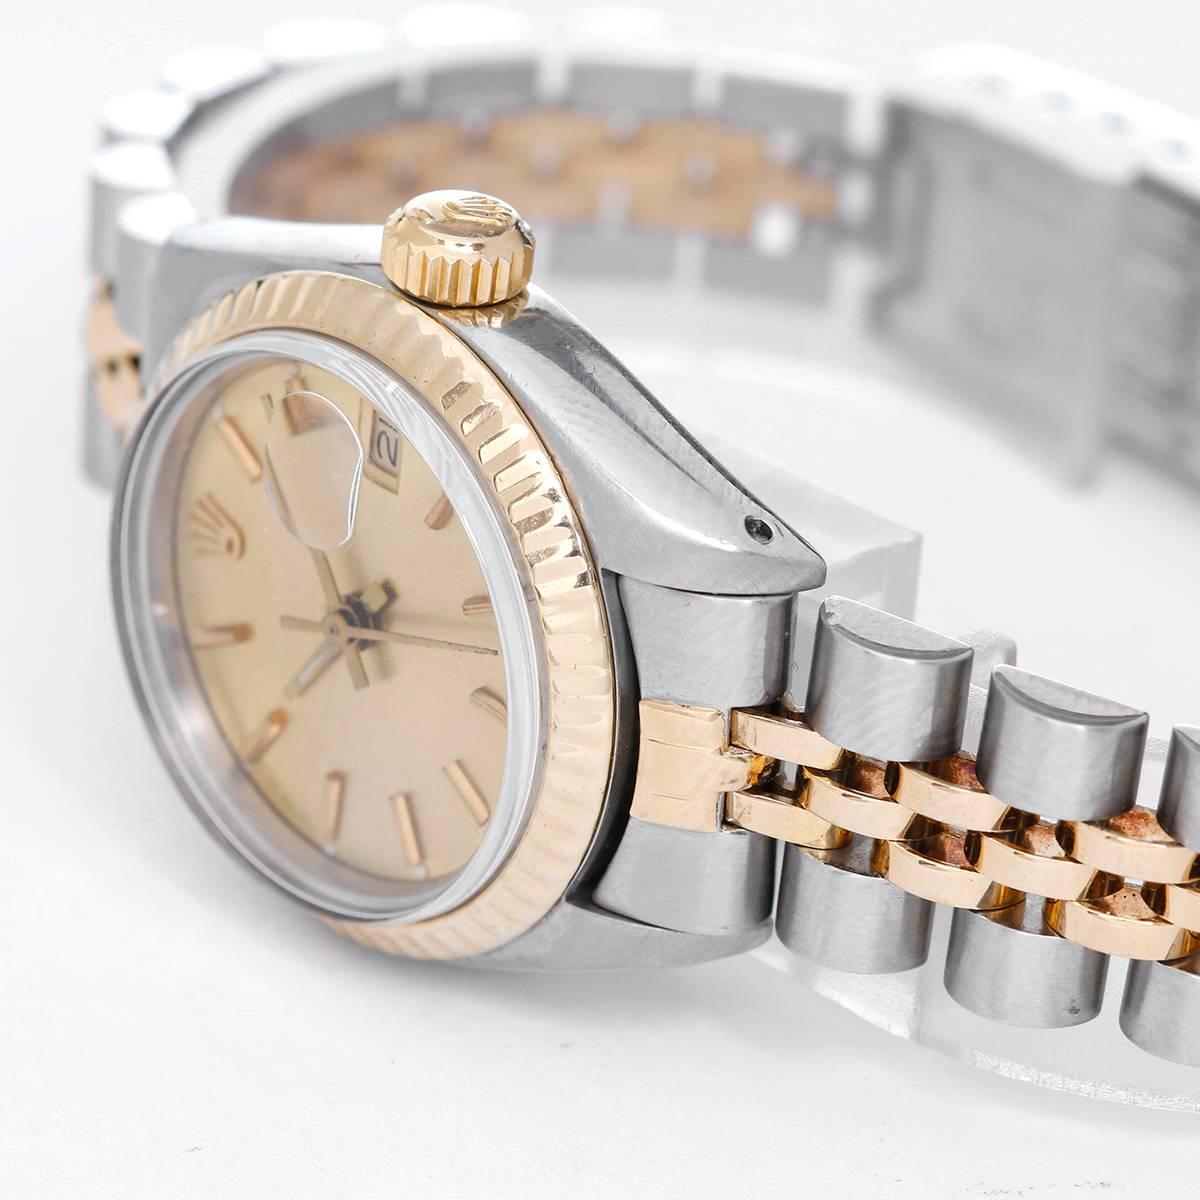 Ladies Rolex Date 2-Tone Watch 6917 -  Automatic winding, 29 jewels, date, acrylic crystal. Stainless steel case with 18k yellow gold fluted bezel (26mm diameter). Silvered dial with stick markers. Stainless steel and 18k yellow gold Jubilee